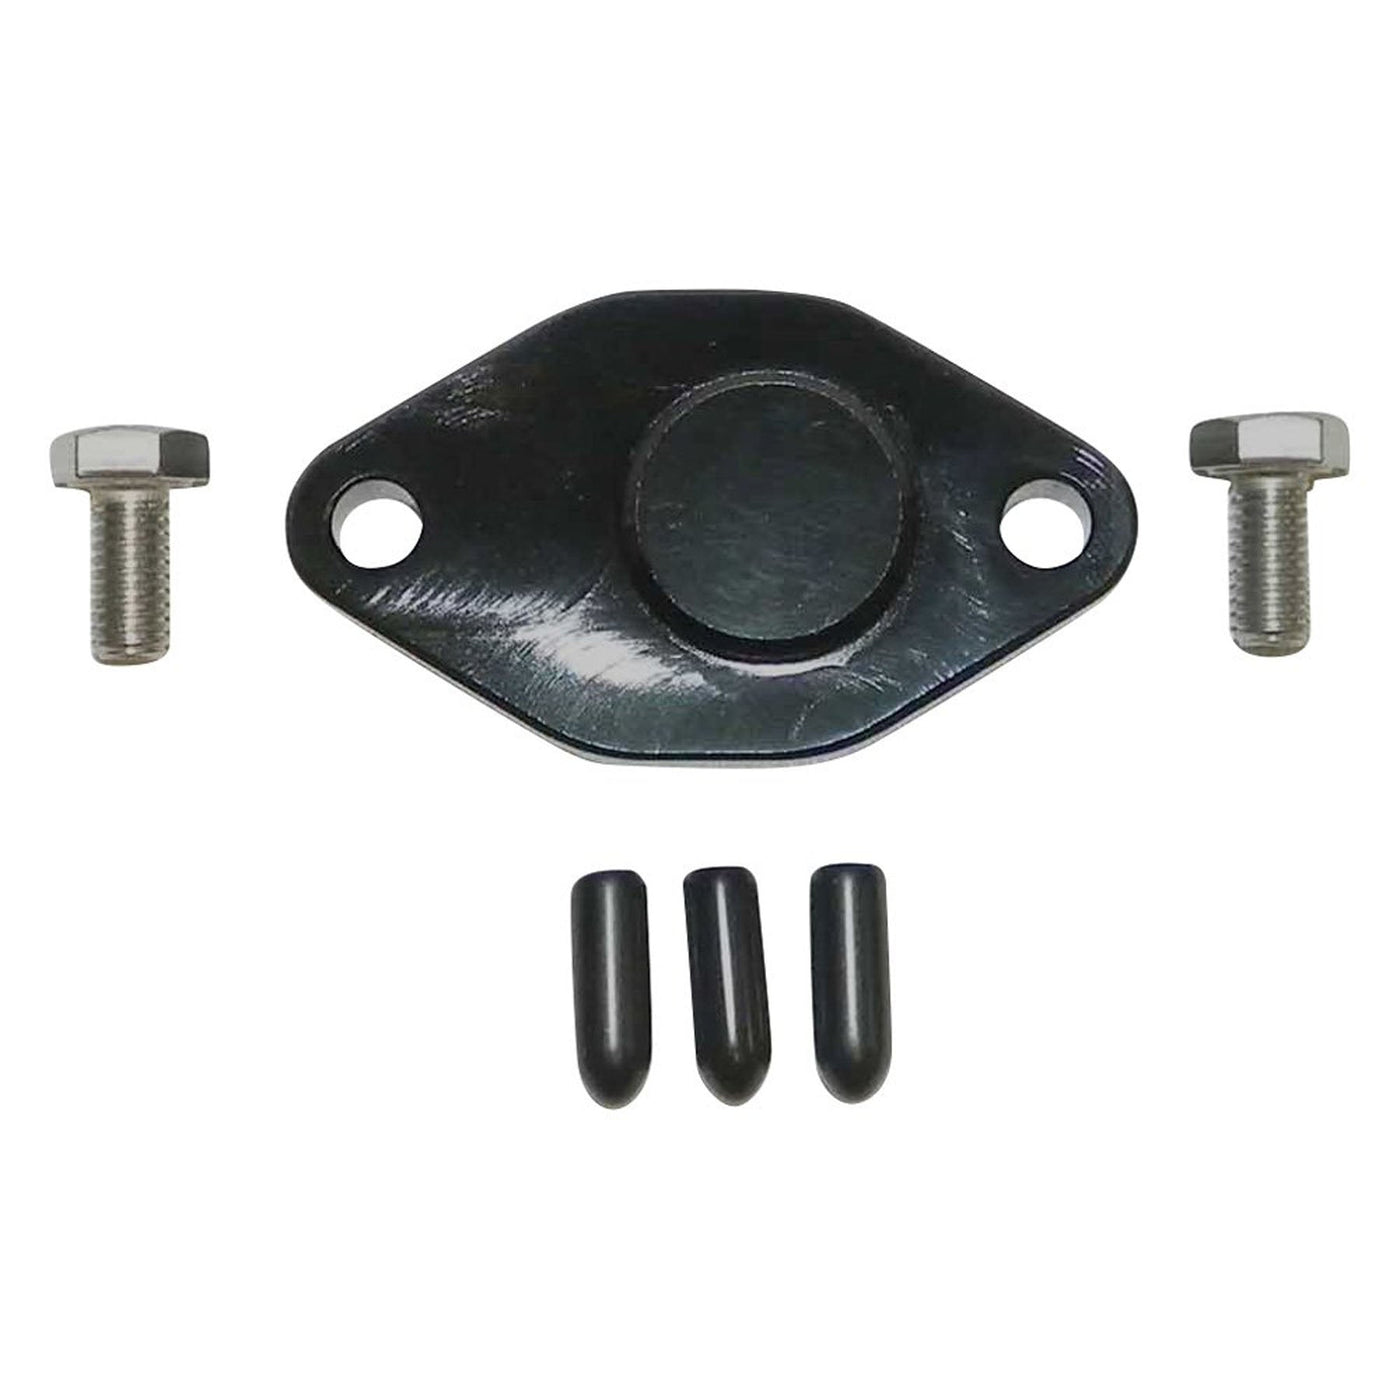 WSM 011-216 Oil Injection Block Off Plate #011-216